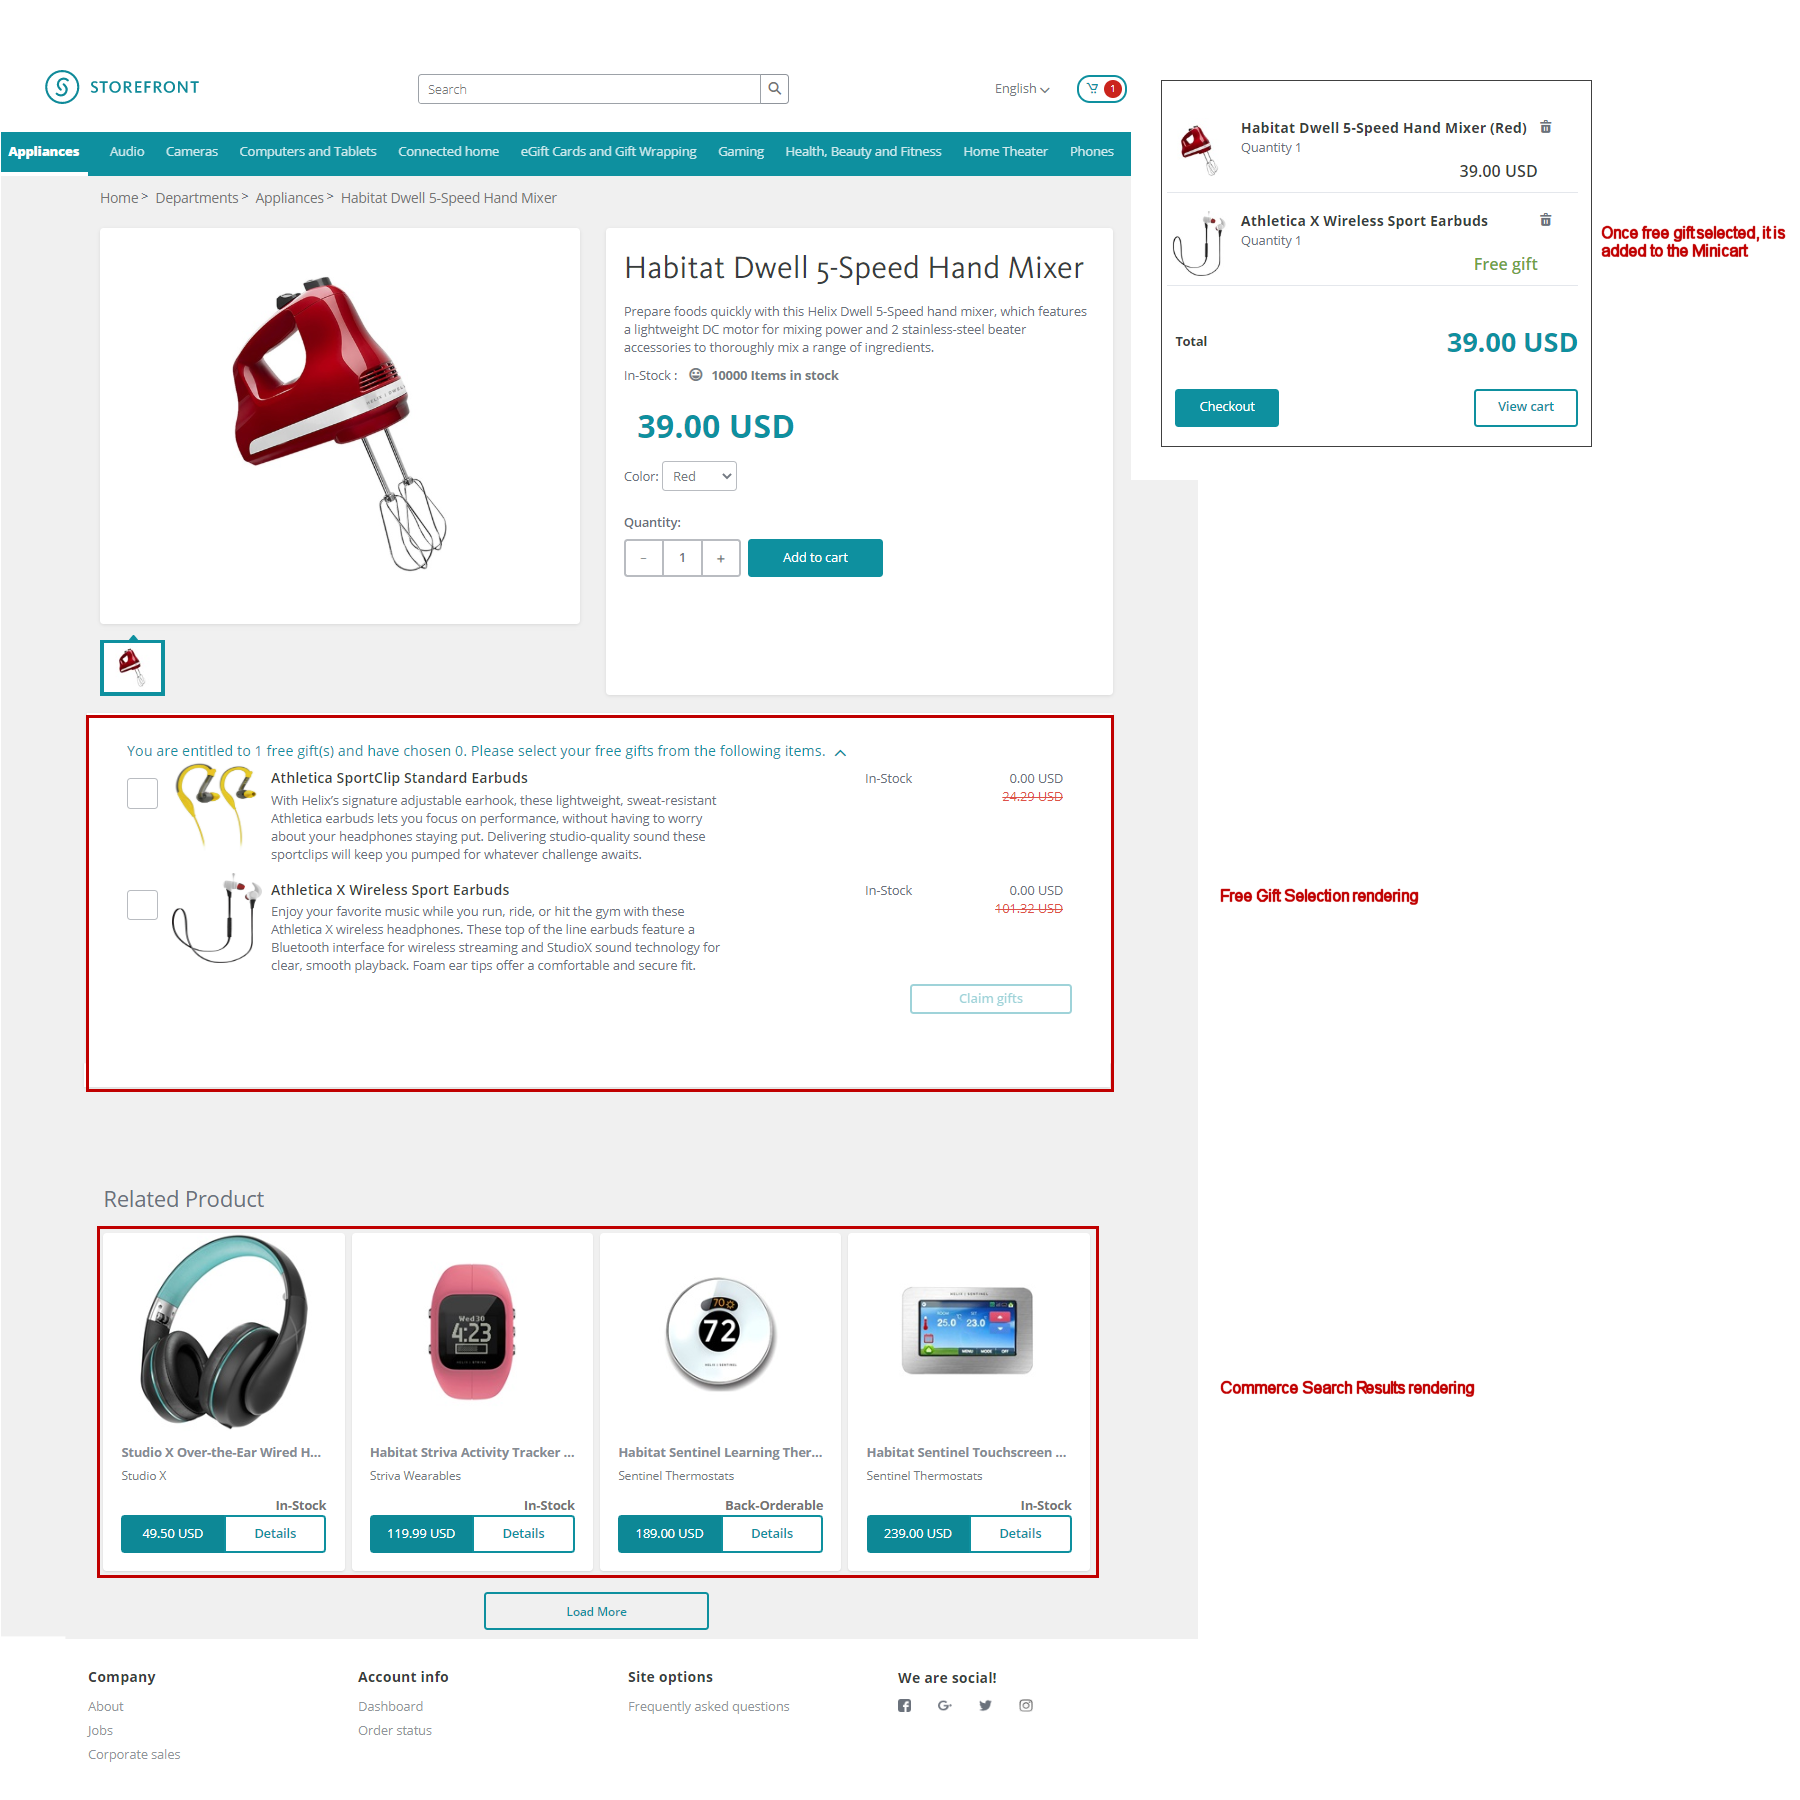 Example of the product page on the live storefront